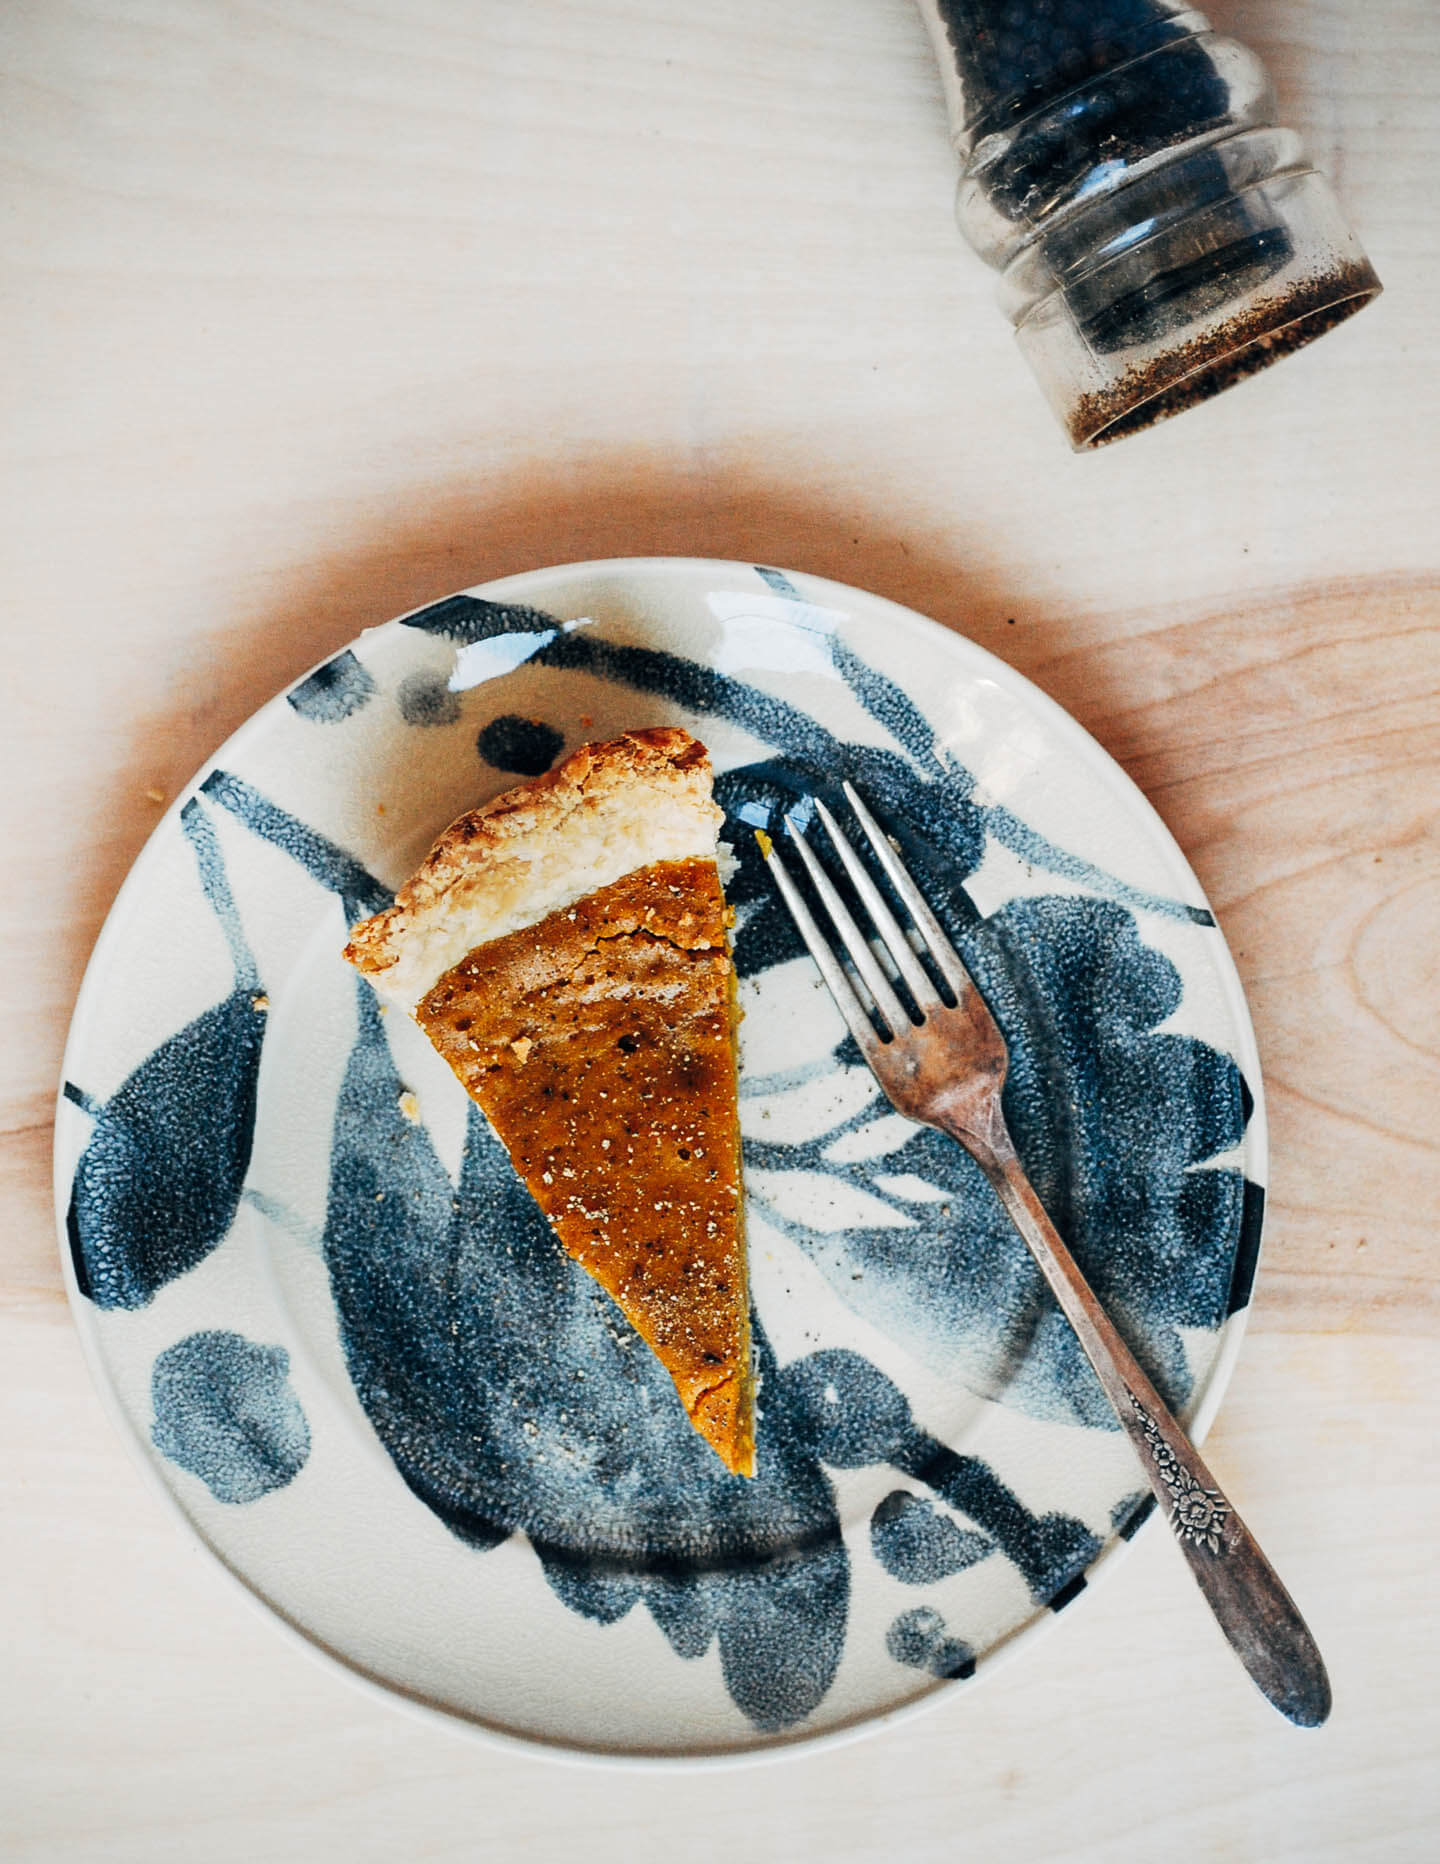 A creative twist on a classic pumpkin pie recipe, this kabocha squash pie is flecked with chipotle chili powder, black pepper, and fresh ginger.